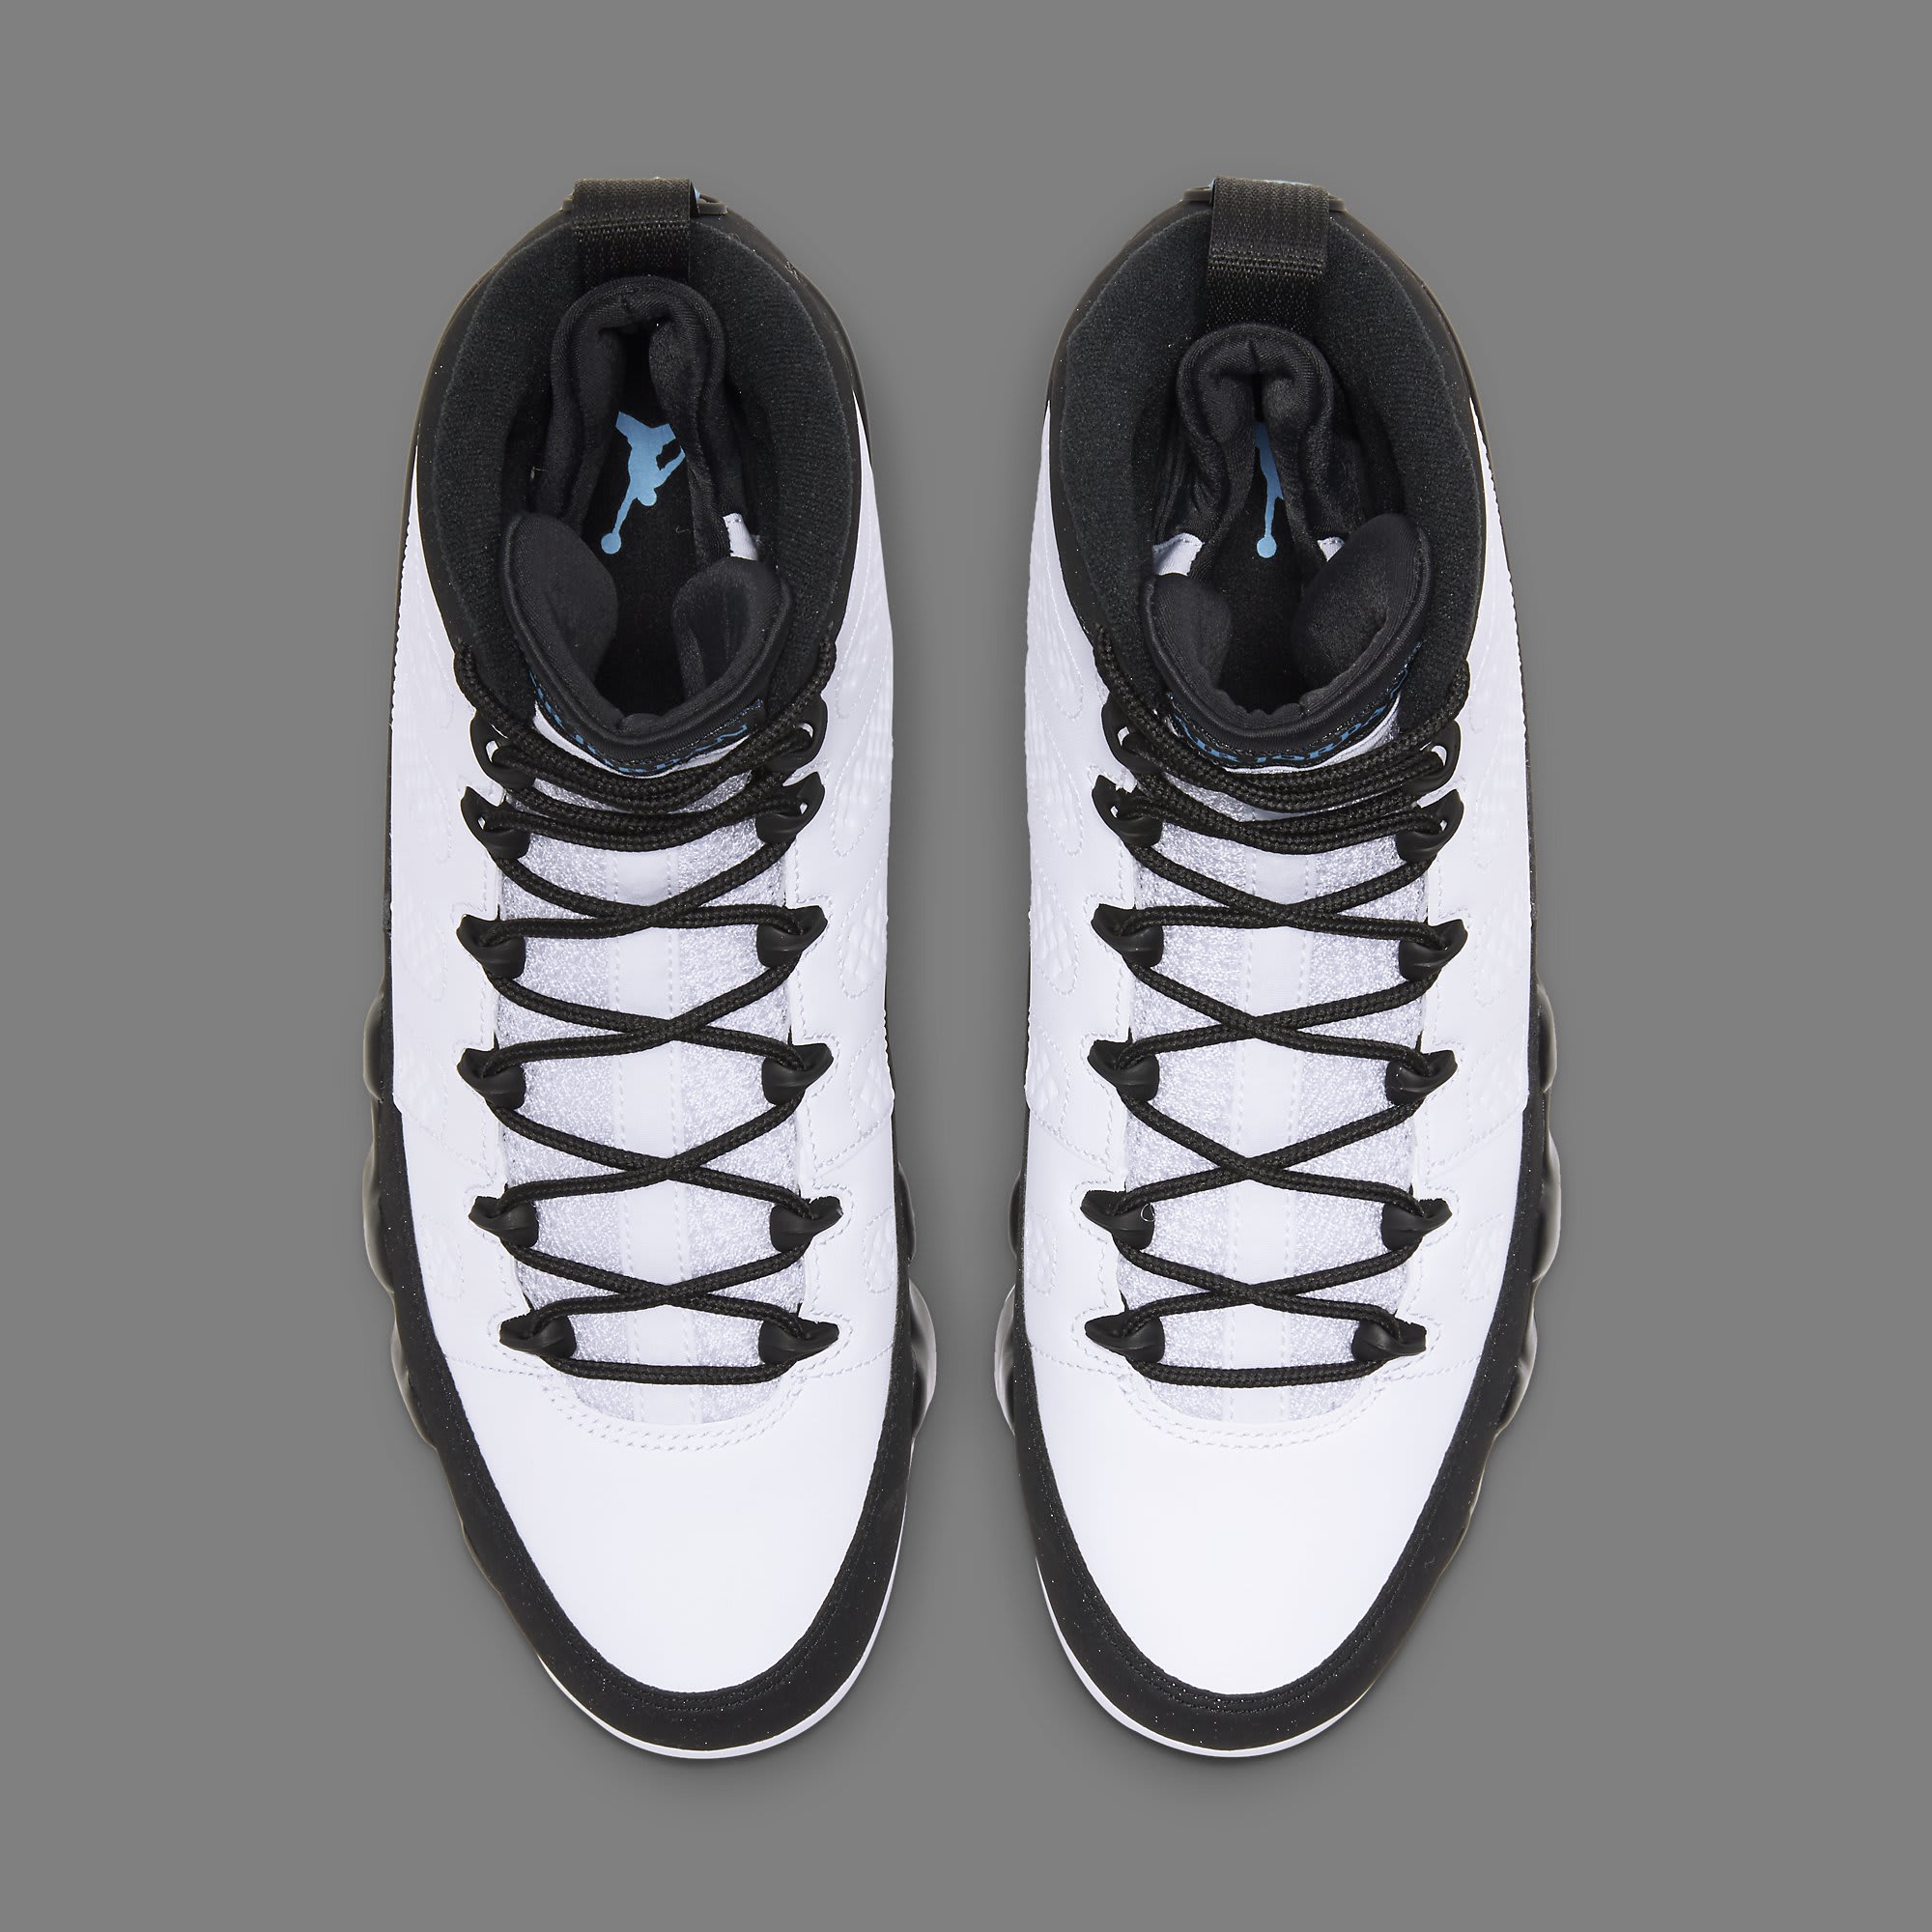 jordan 9 that just came out